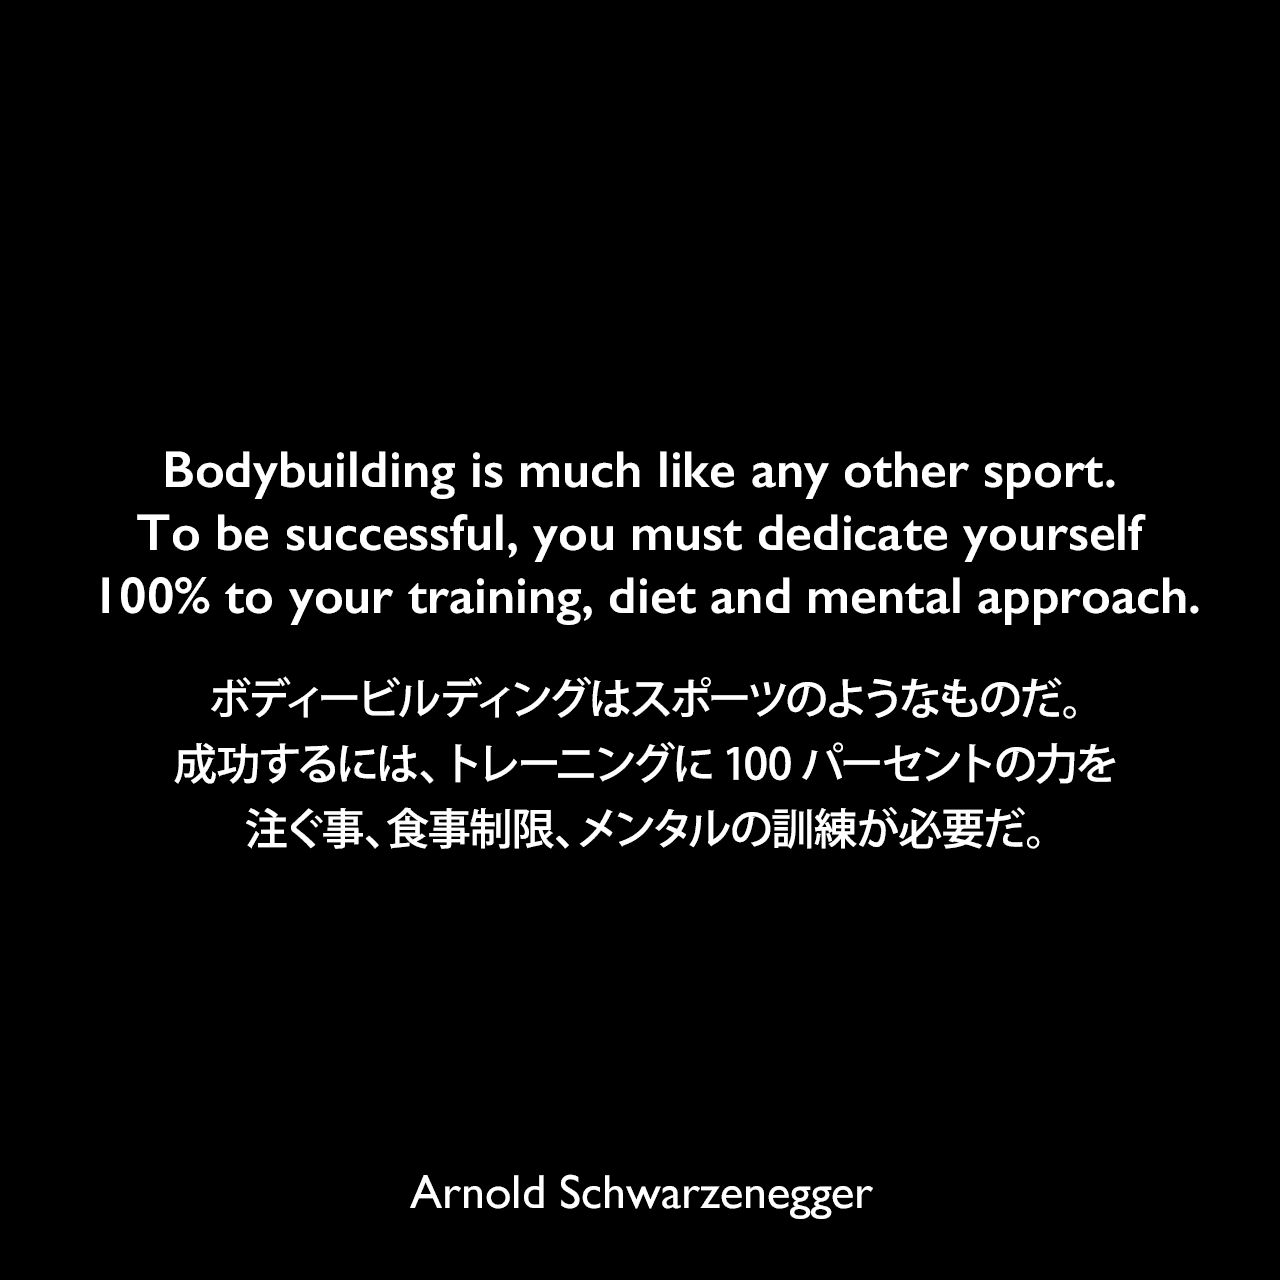 Bodybuilding is much like any other sport. To be successful, you must dedicate yourself 100% to your training, diet and mental approach.ボディービルディングはスポーツのようなものだ。成功するには、トレーニングに100パーセントの力を注ぐ事、食事制限、メンタルの訓練が必要だ。Arnold Schwarzenegger